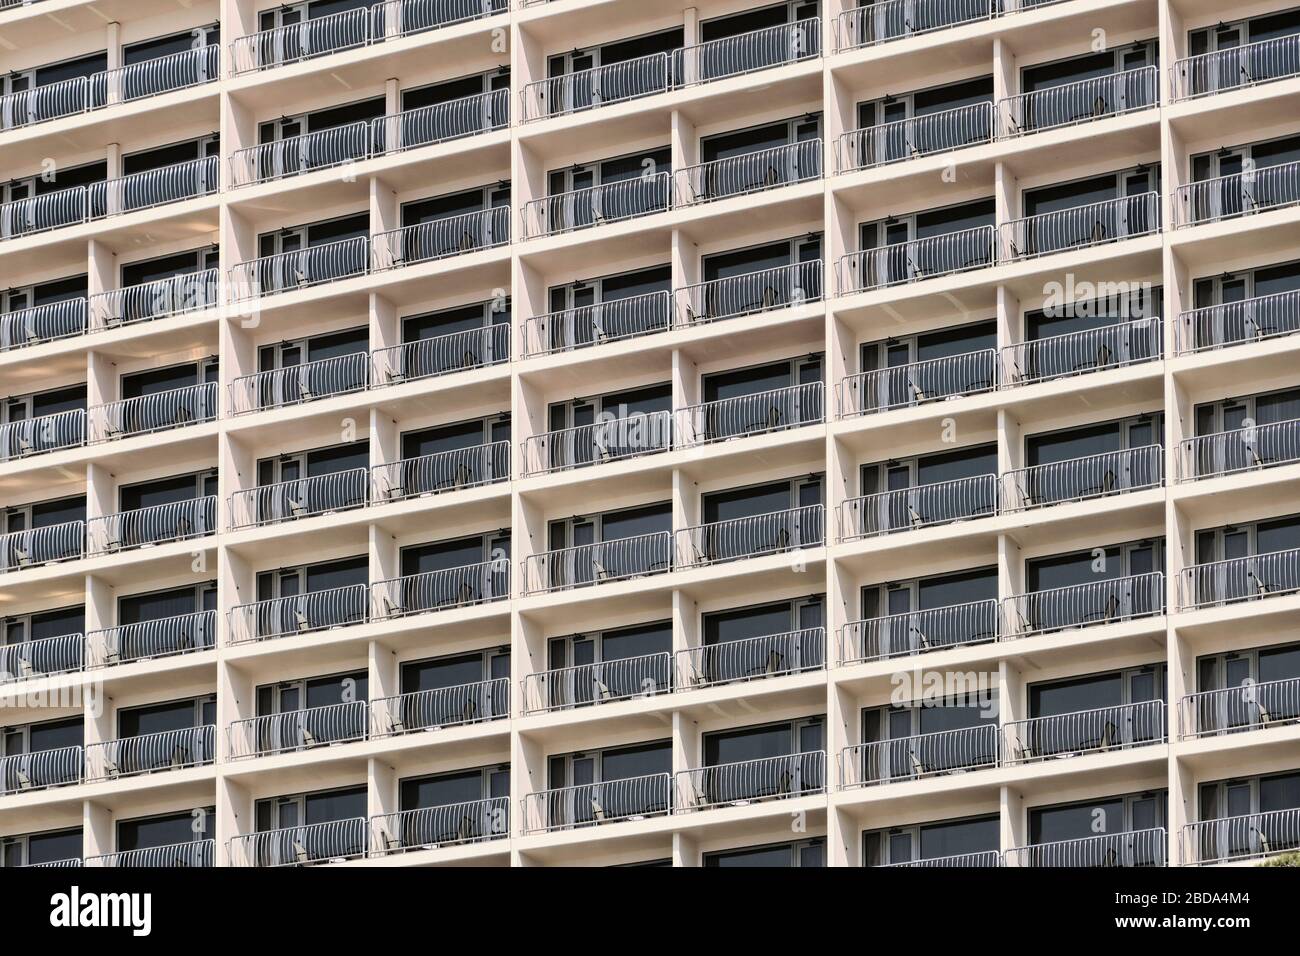 Closeup of a balcony pattern on an urban building Stock Photo